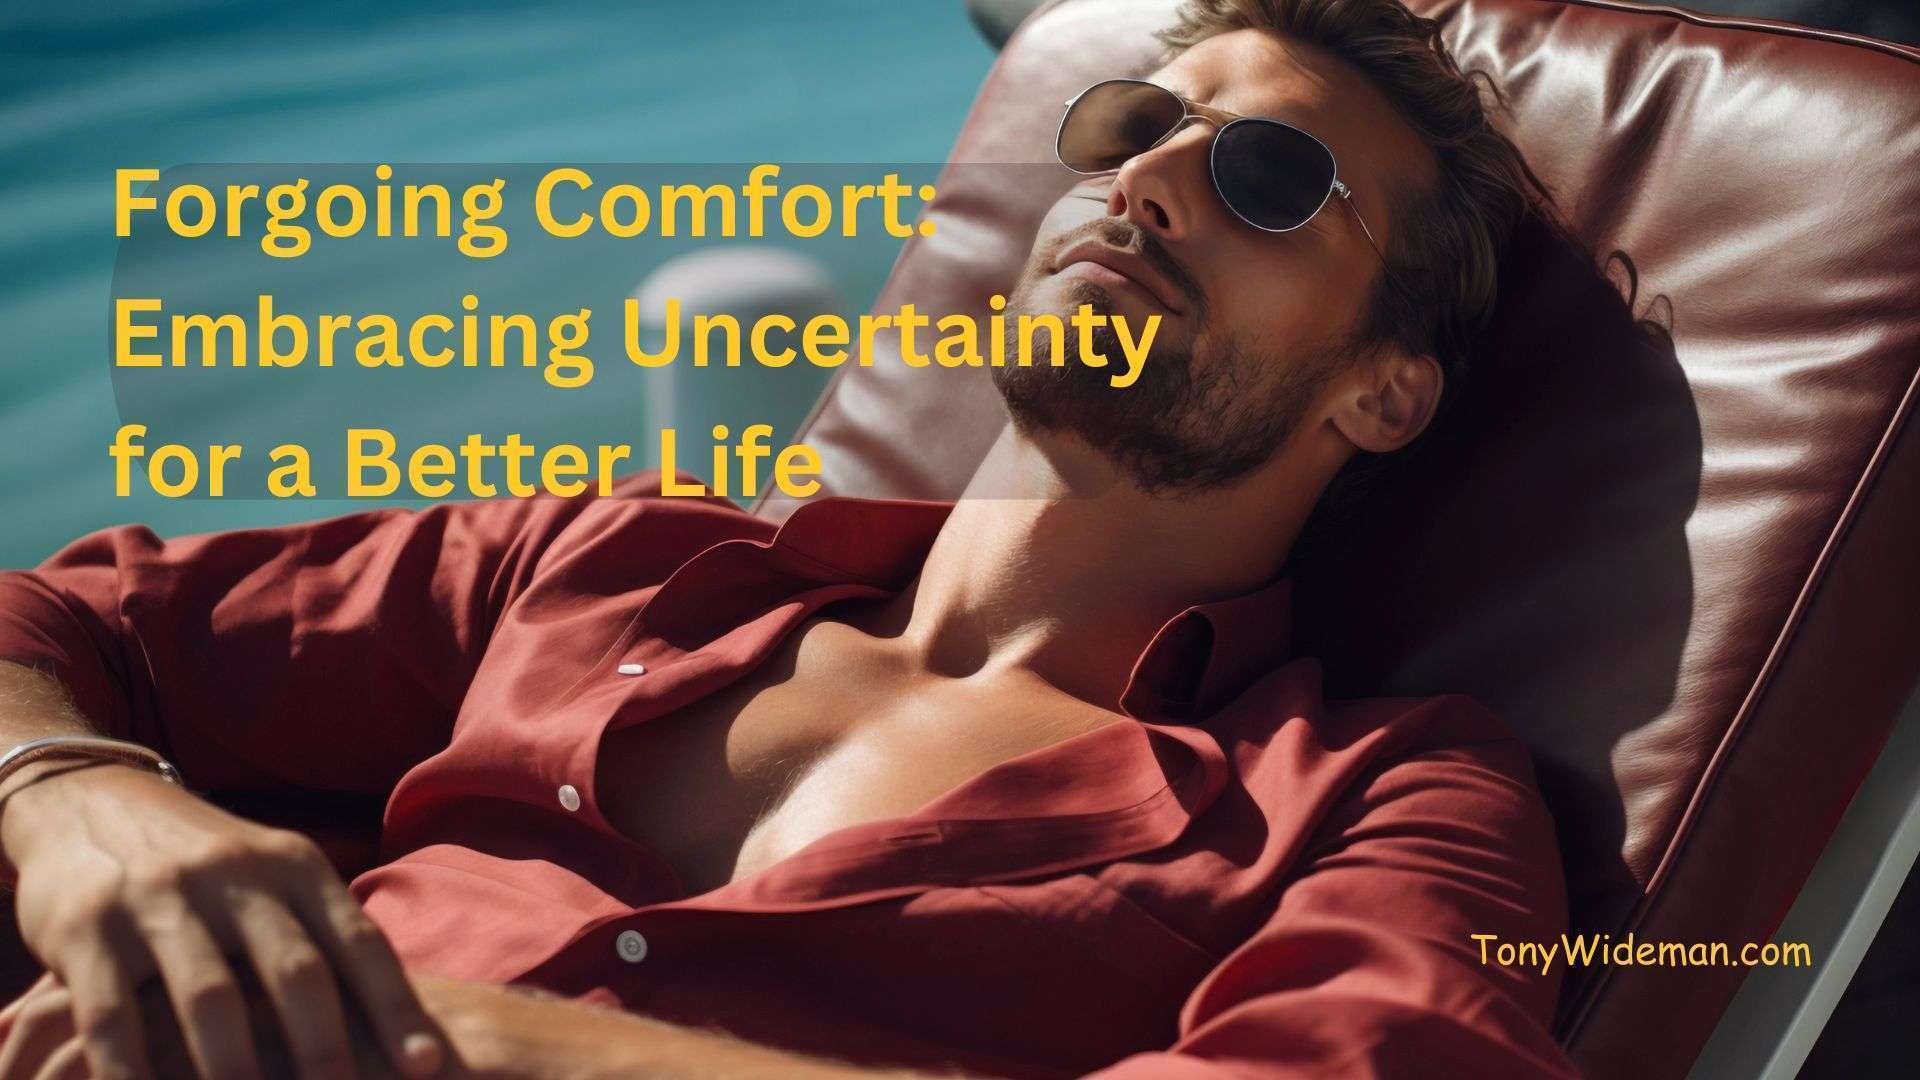 Forgoing Comfort: Embracing Uncertainty for a Better Life